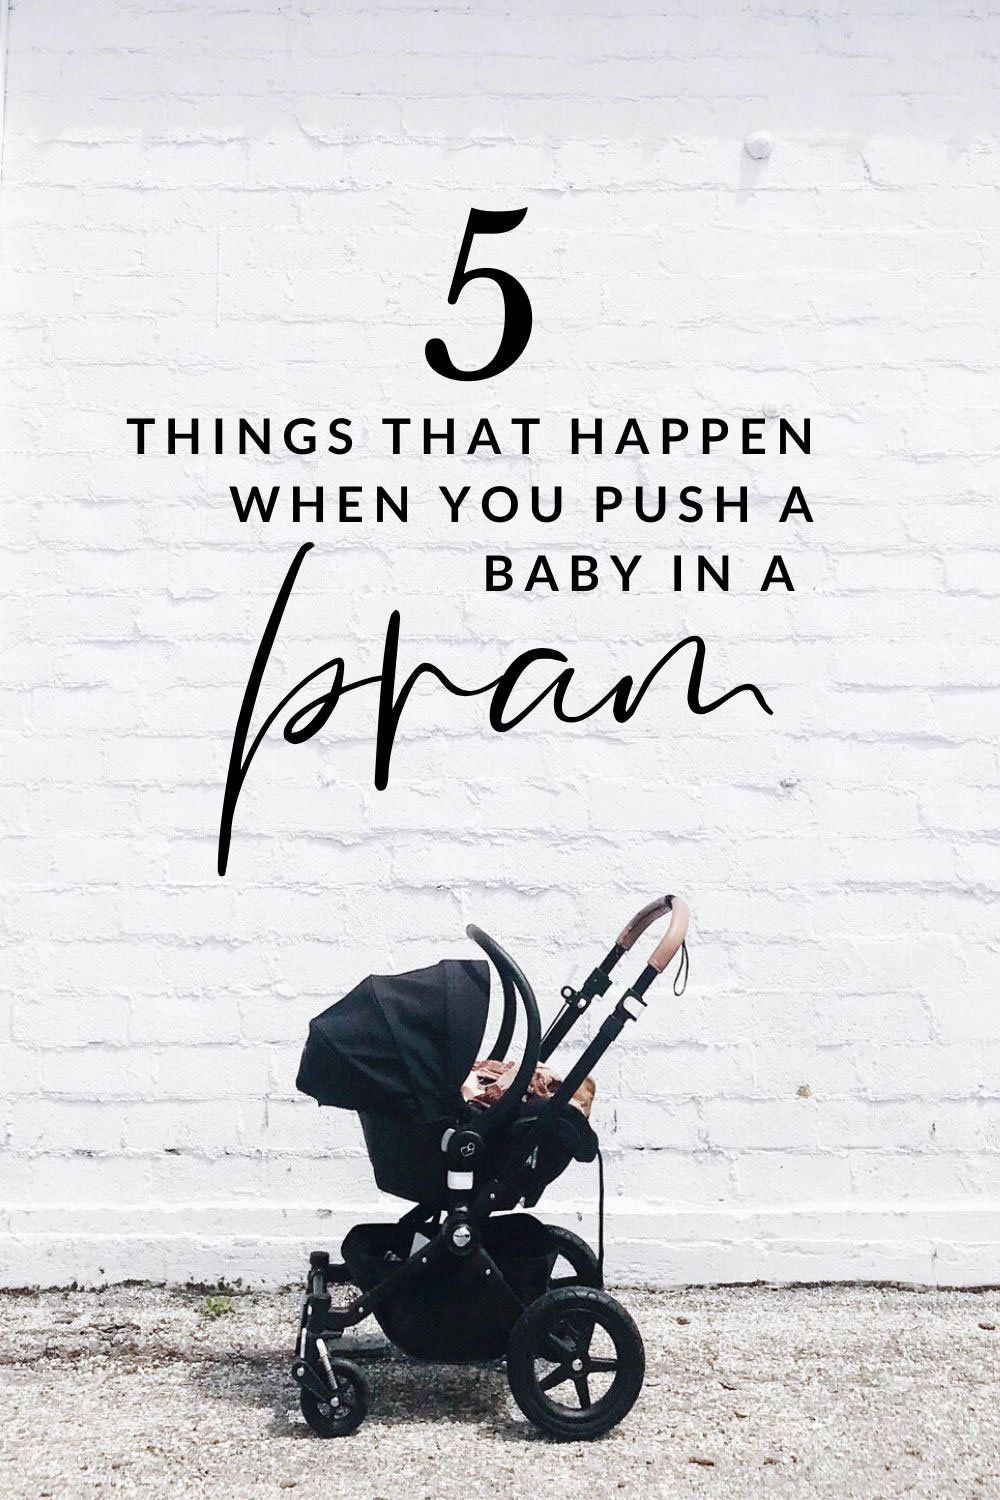 5 things that happen when you push a baby in a pram